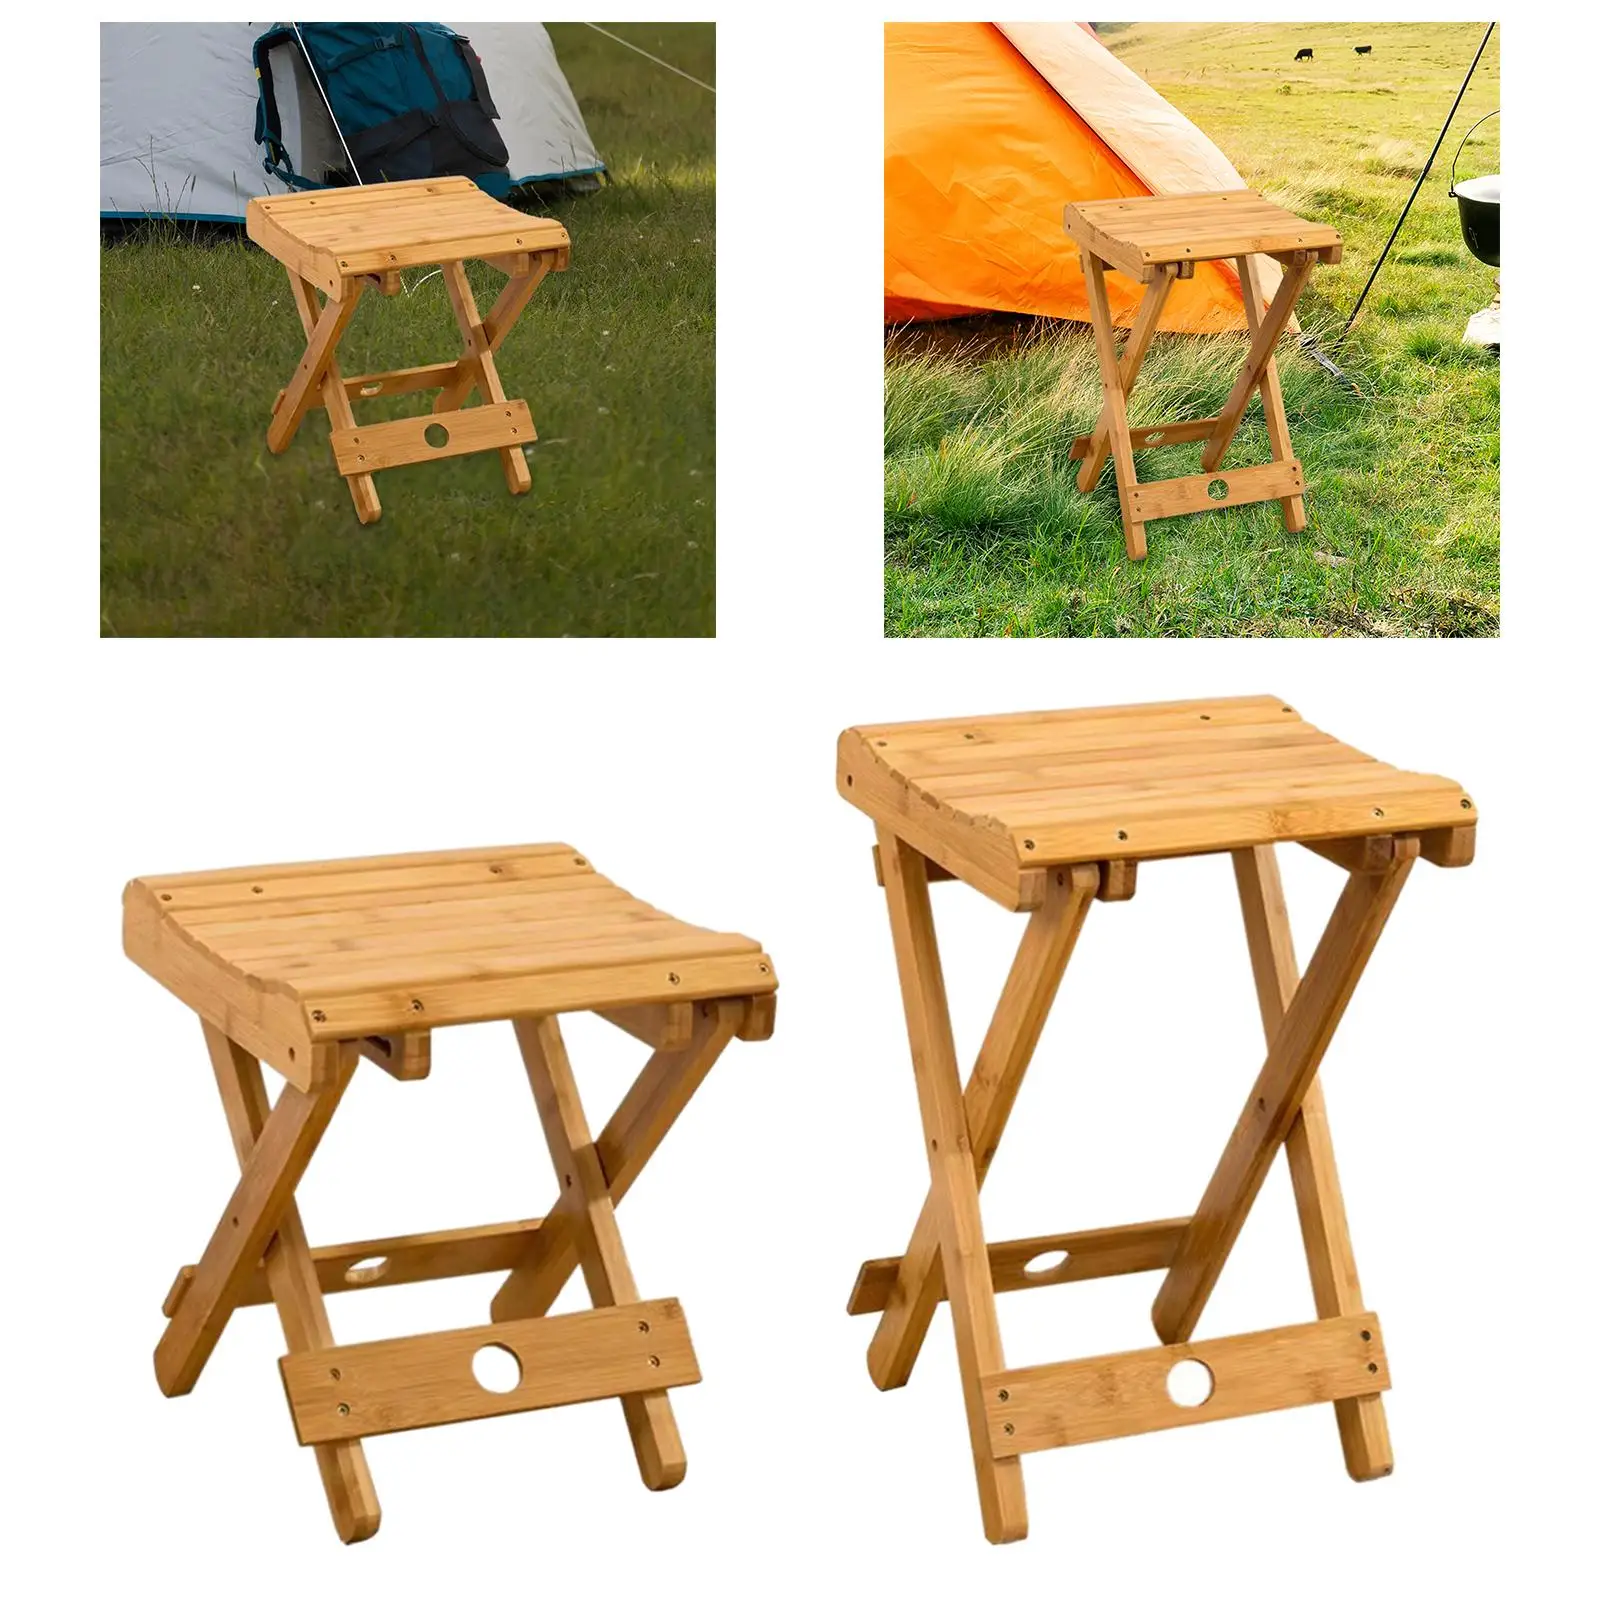 Bamboo Folding Stool Camp Stool Collapsible Furniture Ultralight Foldable Stool for Backpacking Garden Travel Backyard Patio